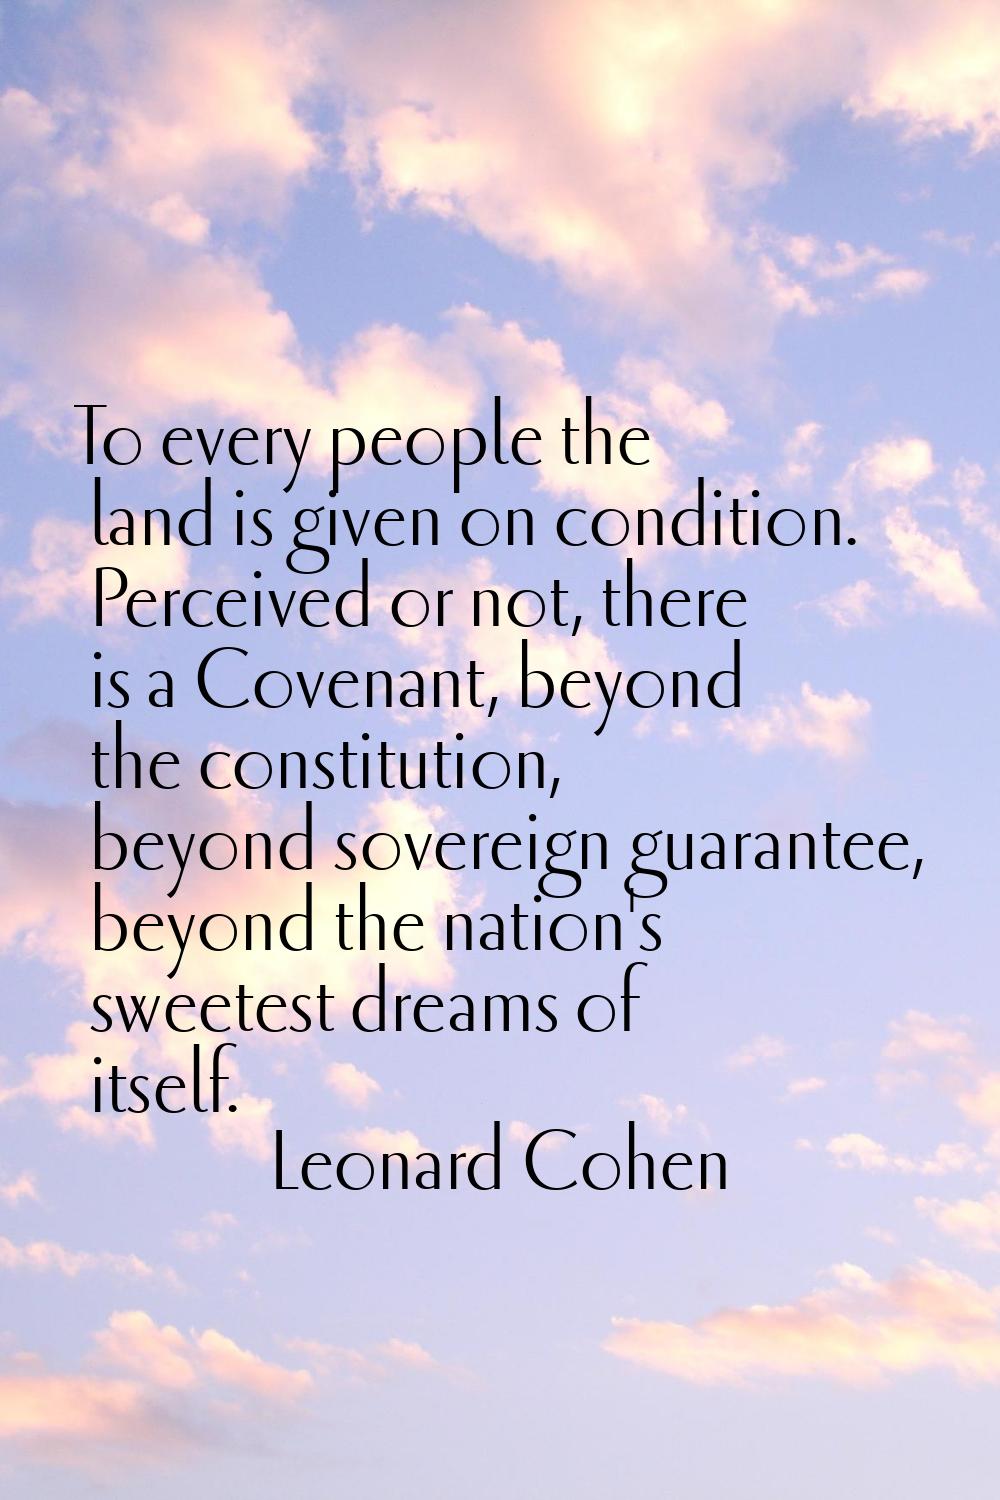 To every people the land is given on condition. Perceived or not, there is a Covenant, beyond the c